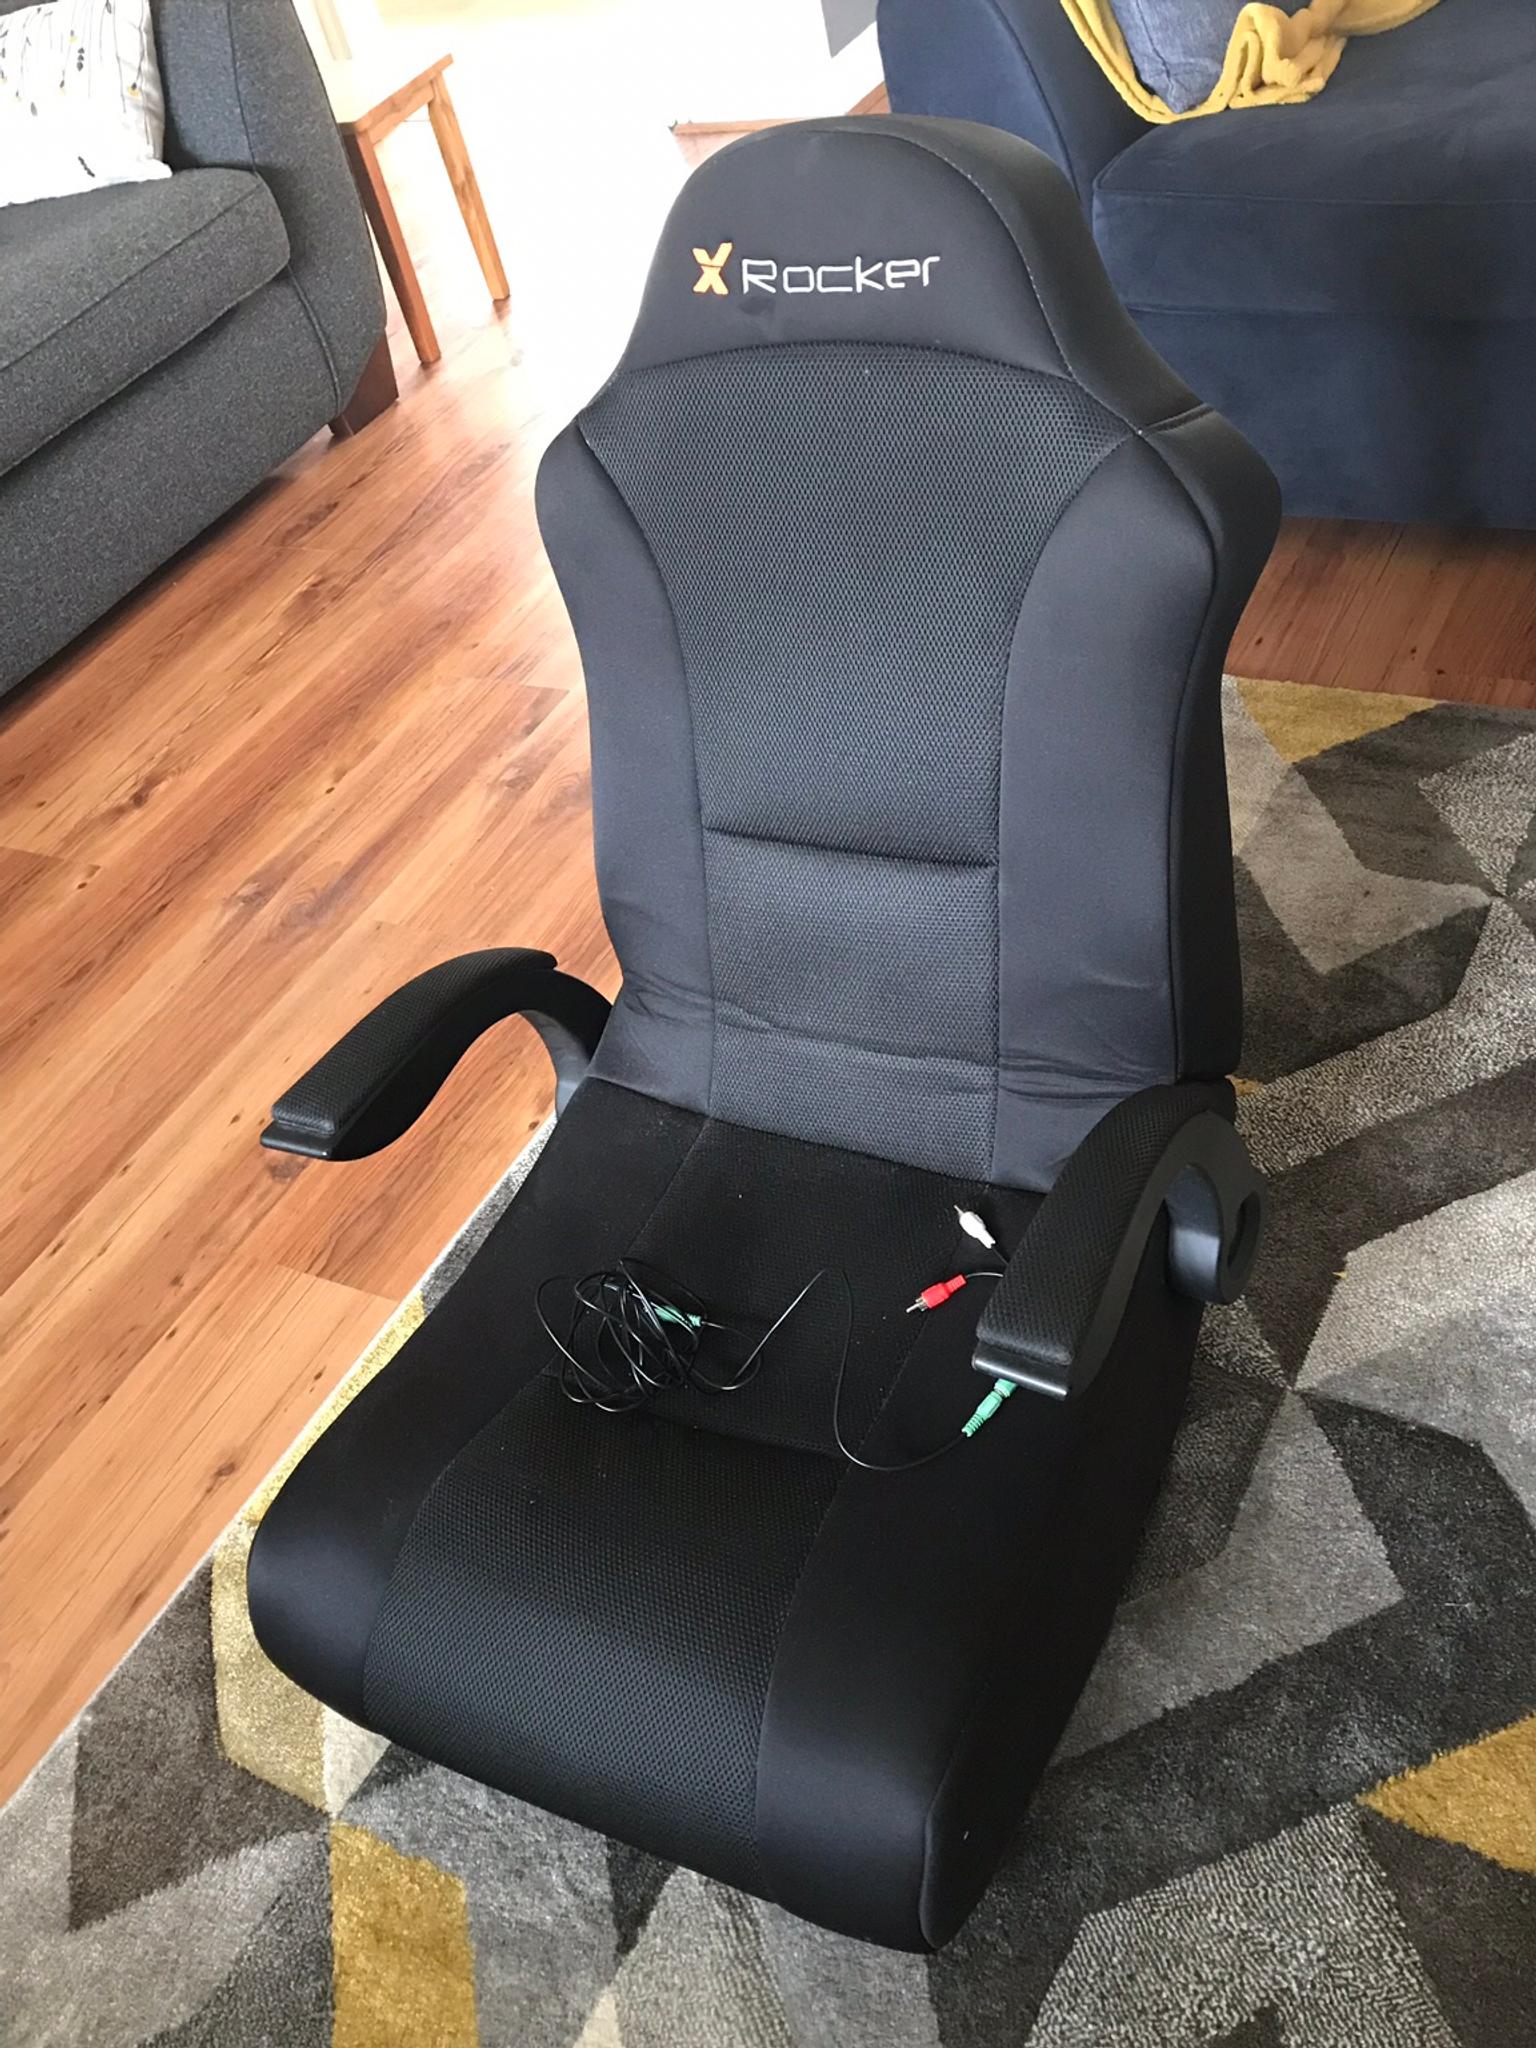 X Rocker Gaming Chair In Wn6 Wigan For 30 00 For Sale Shpock